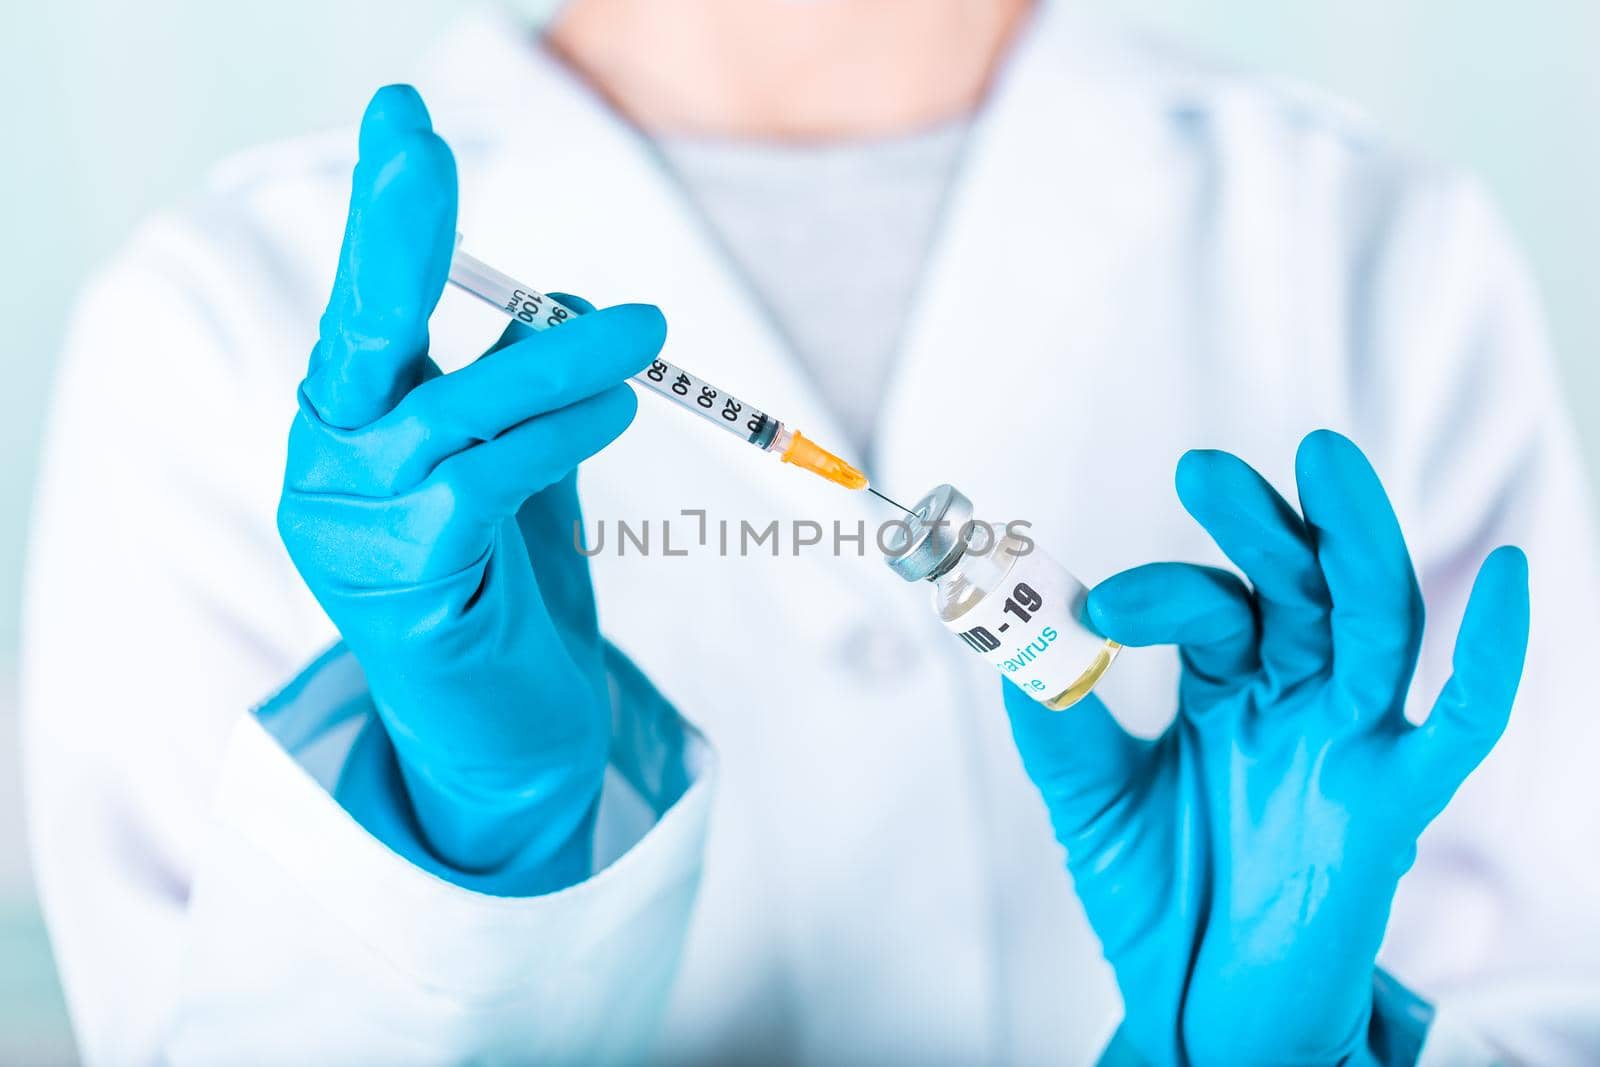 Woman doctor or nurse in uniform and gloves wearing face mask protective in lab, holding medicine vial vaccine bottle with COVID-19 Coronovirus vaccine label